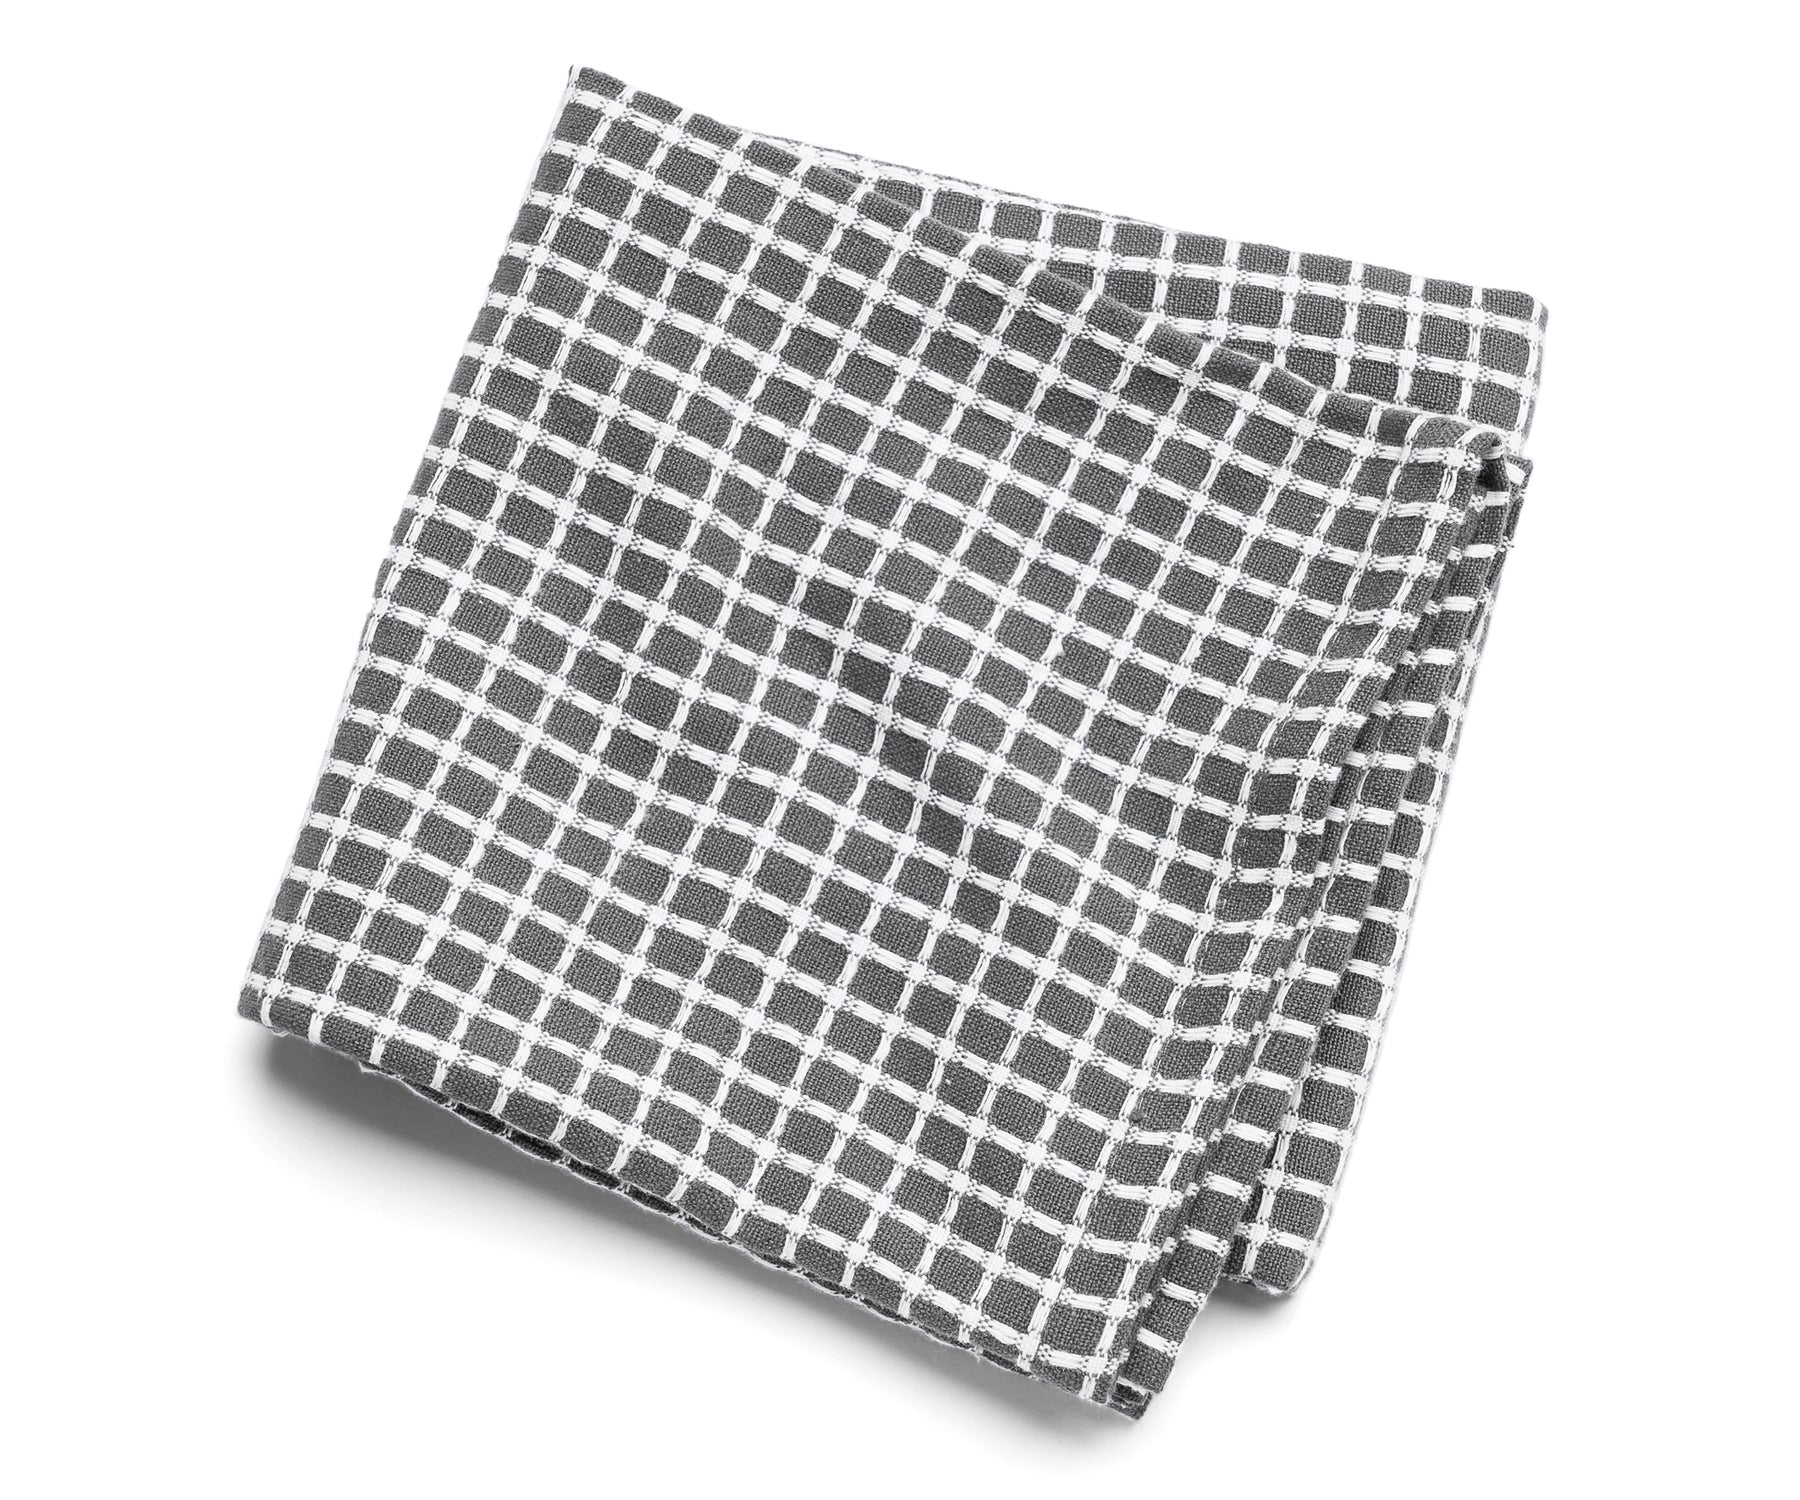 kitchen hand towels cotton, gray and white pattern dish towels, grey kitchen towels set of 6.